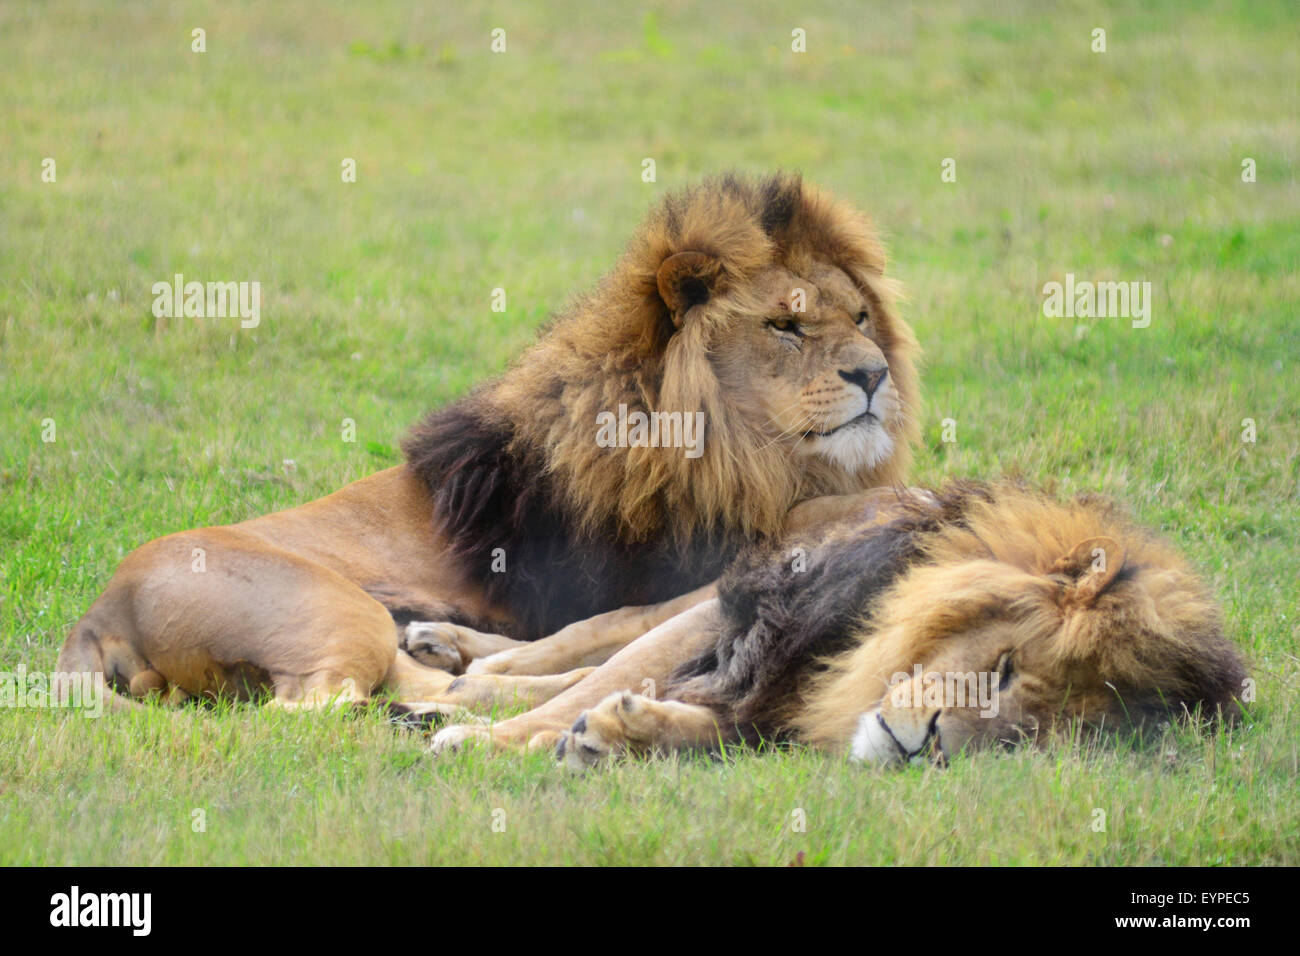 Lions at Yorkshire Wildlife Park, Doncaster, South Yorkshire, UK. Picture: Scott Bairstow/Alamy Stock Photo